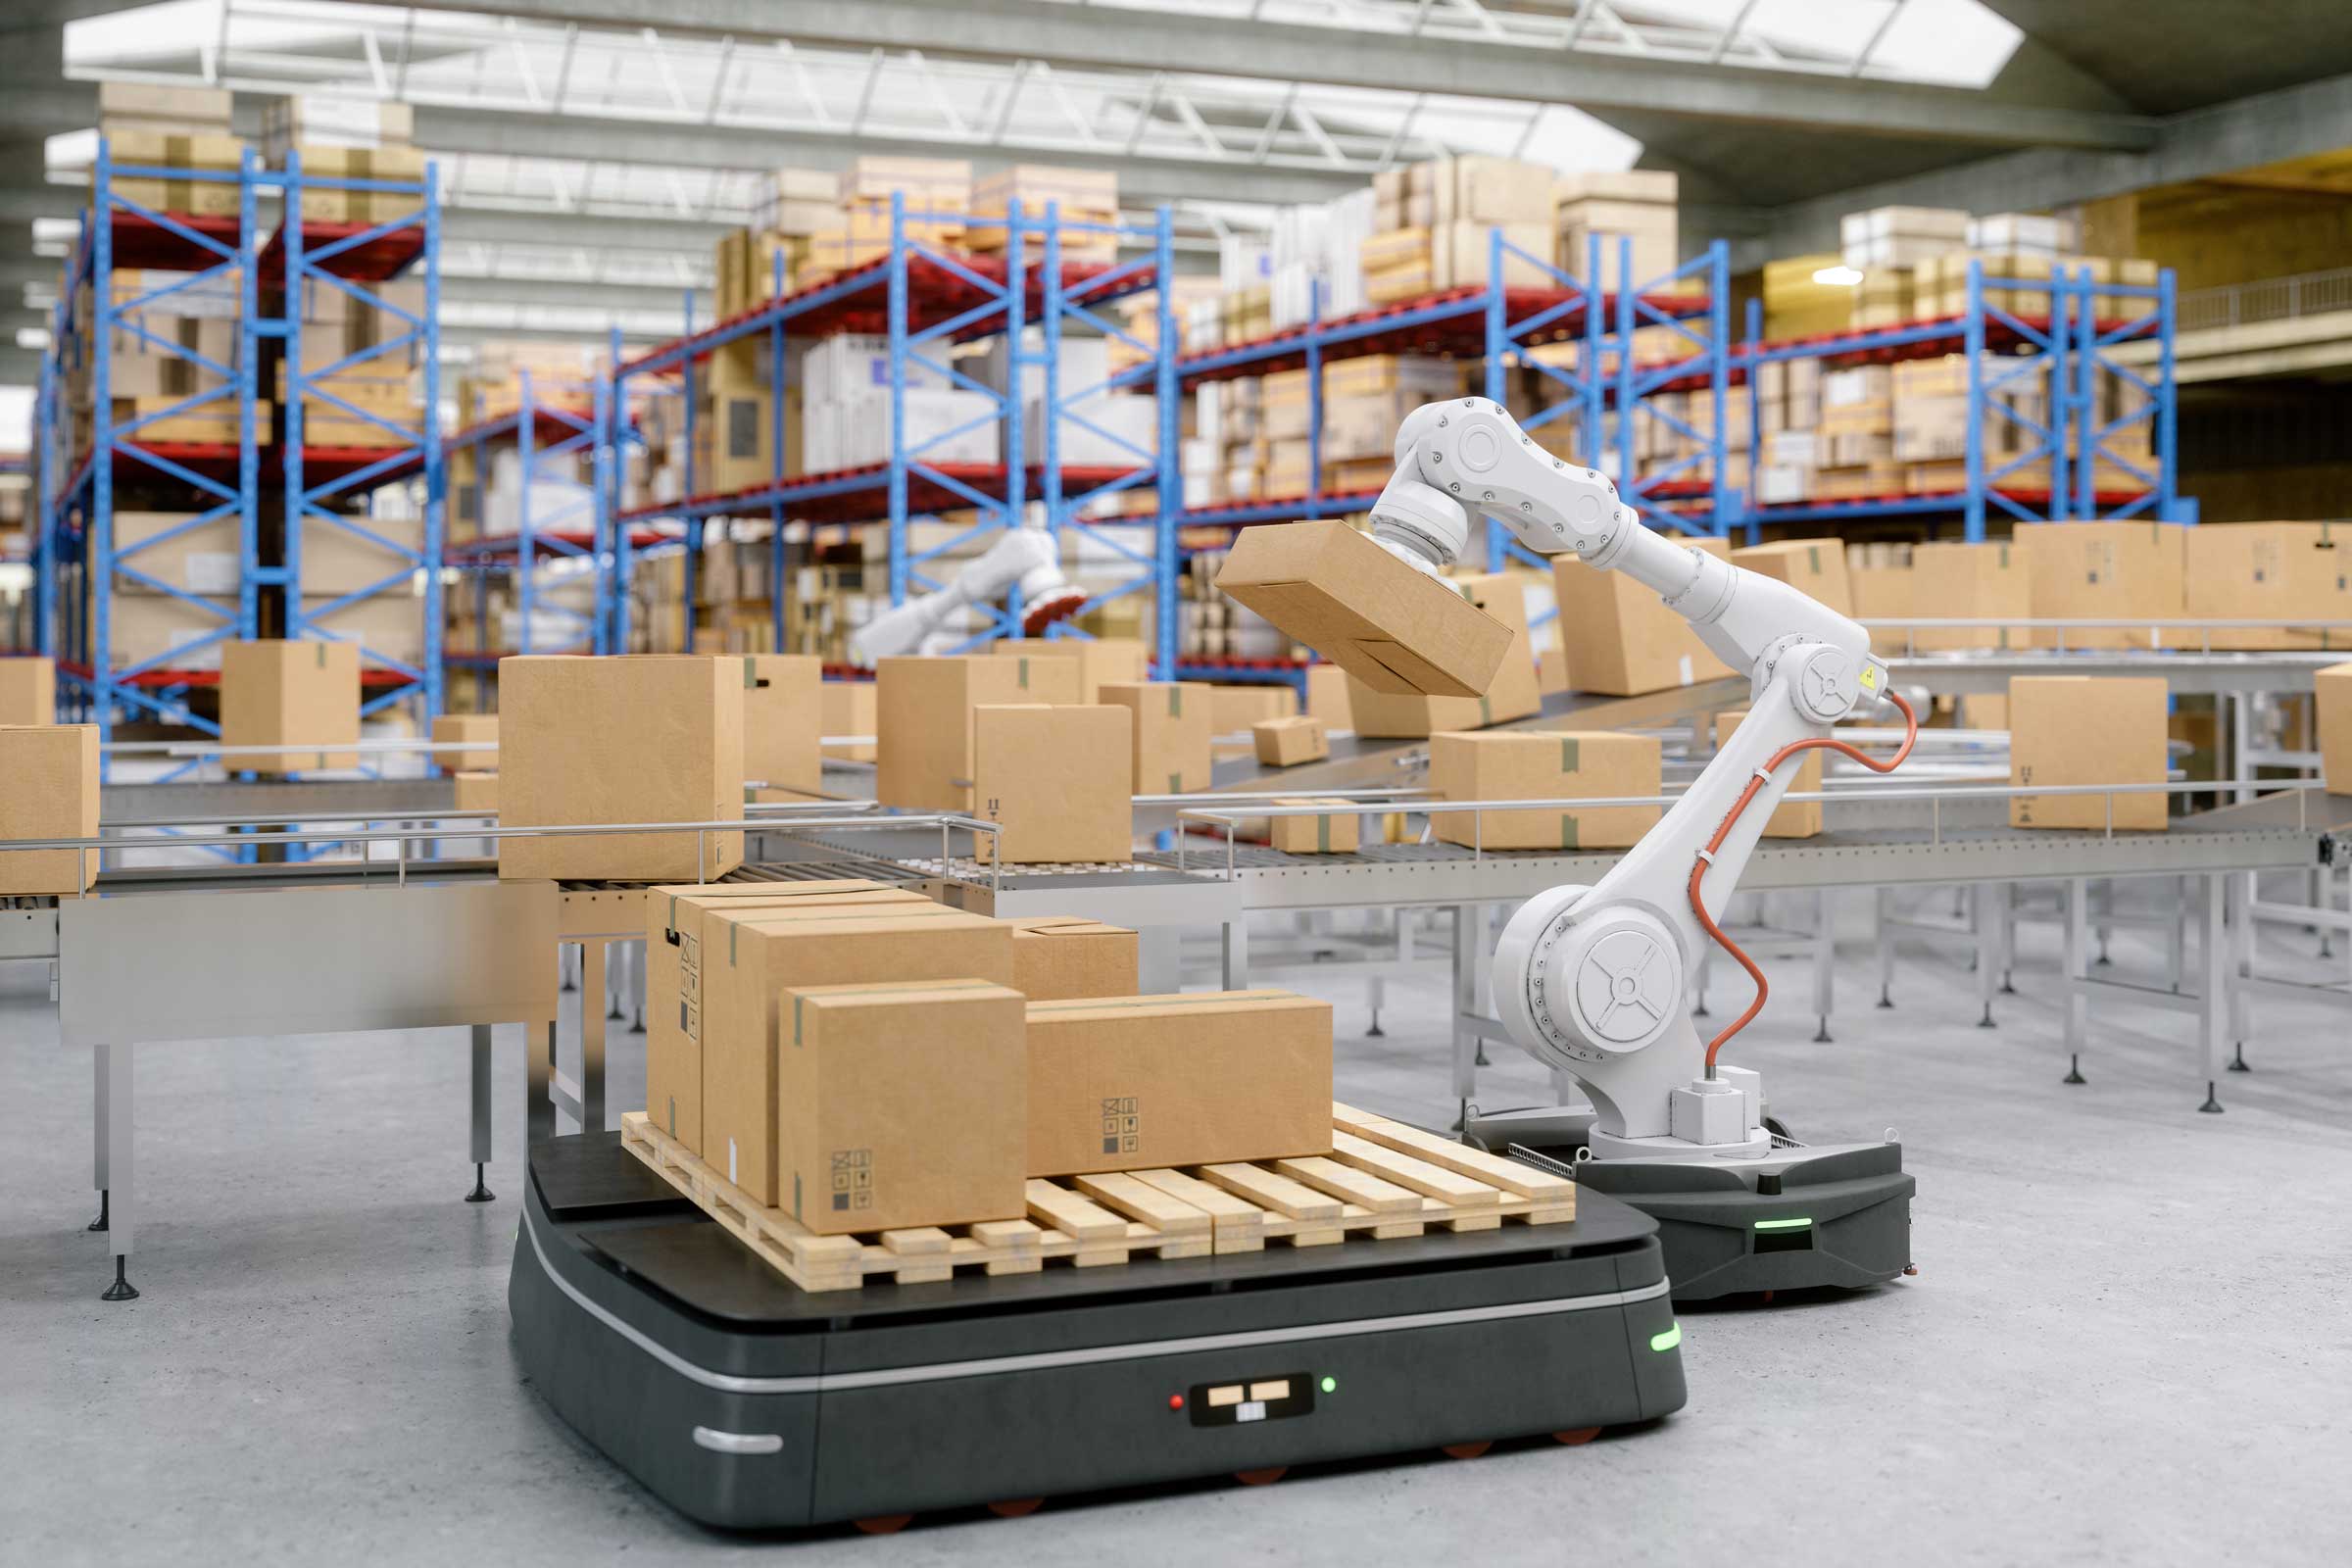 Robotic arm in modern distribution warehouse putting packages on a robotic pallet